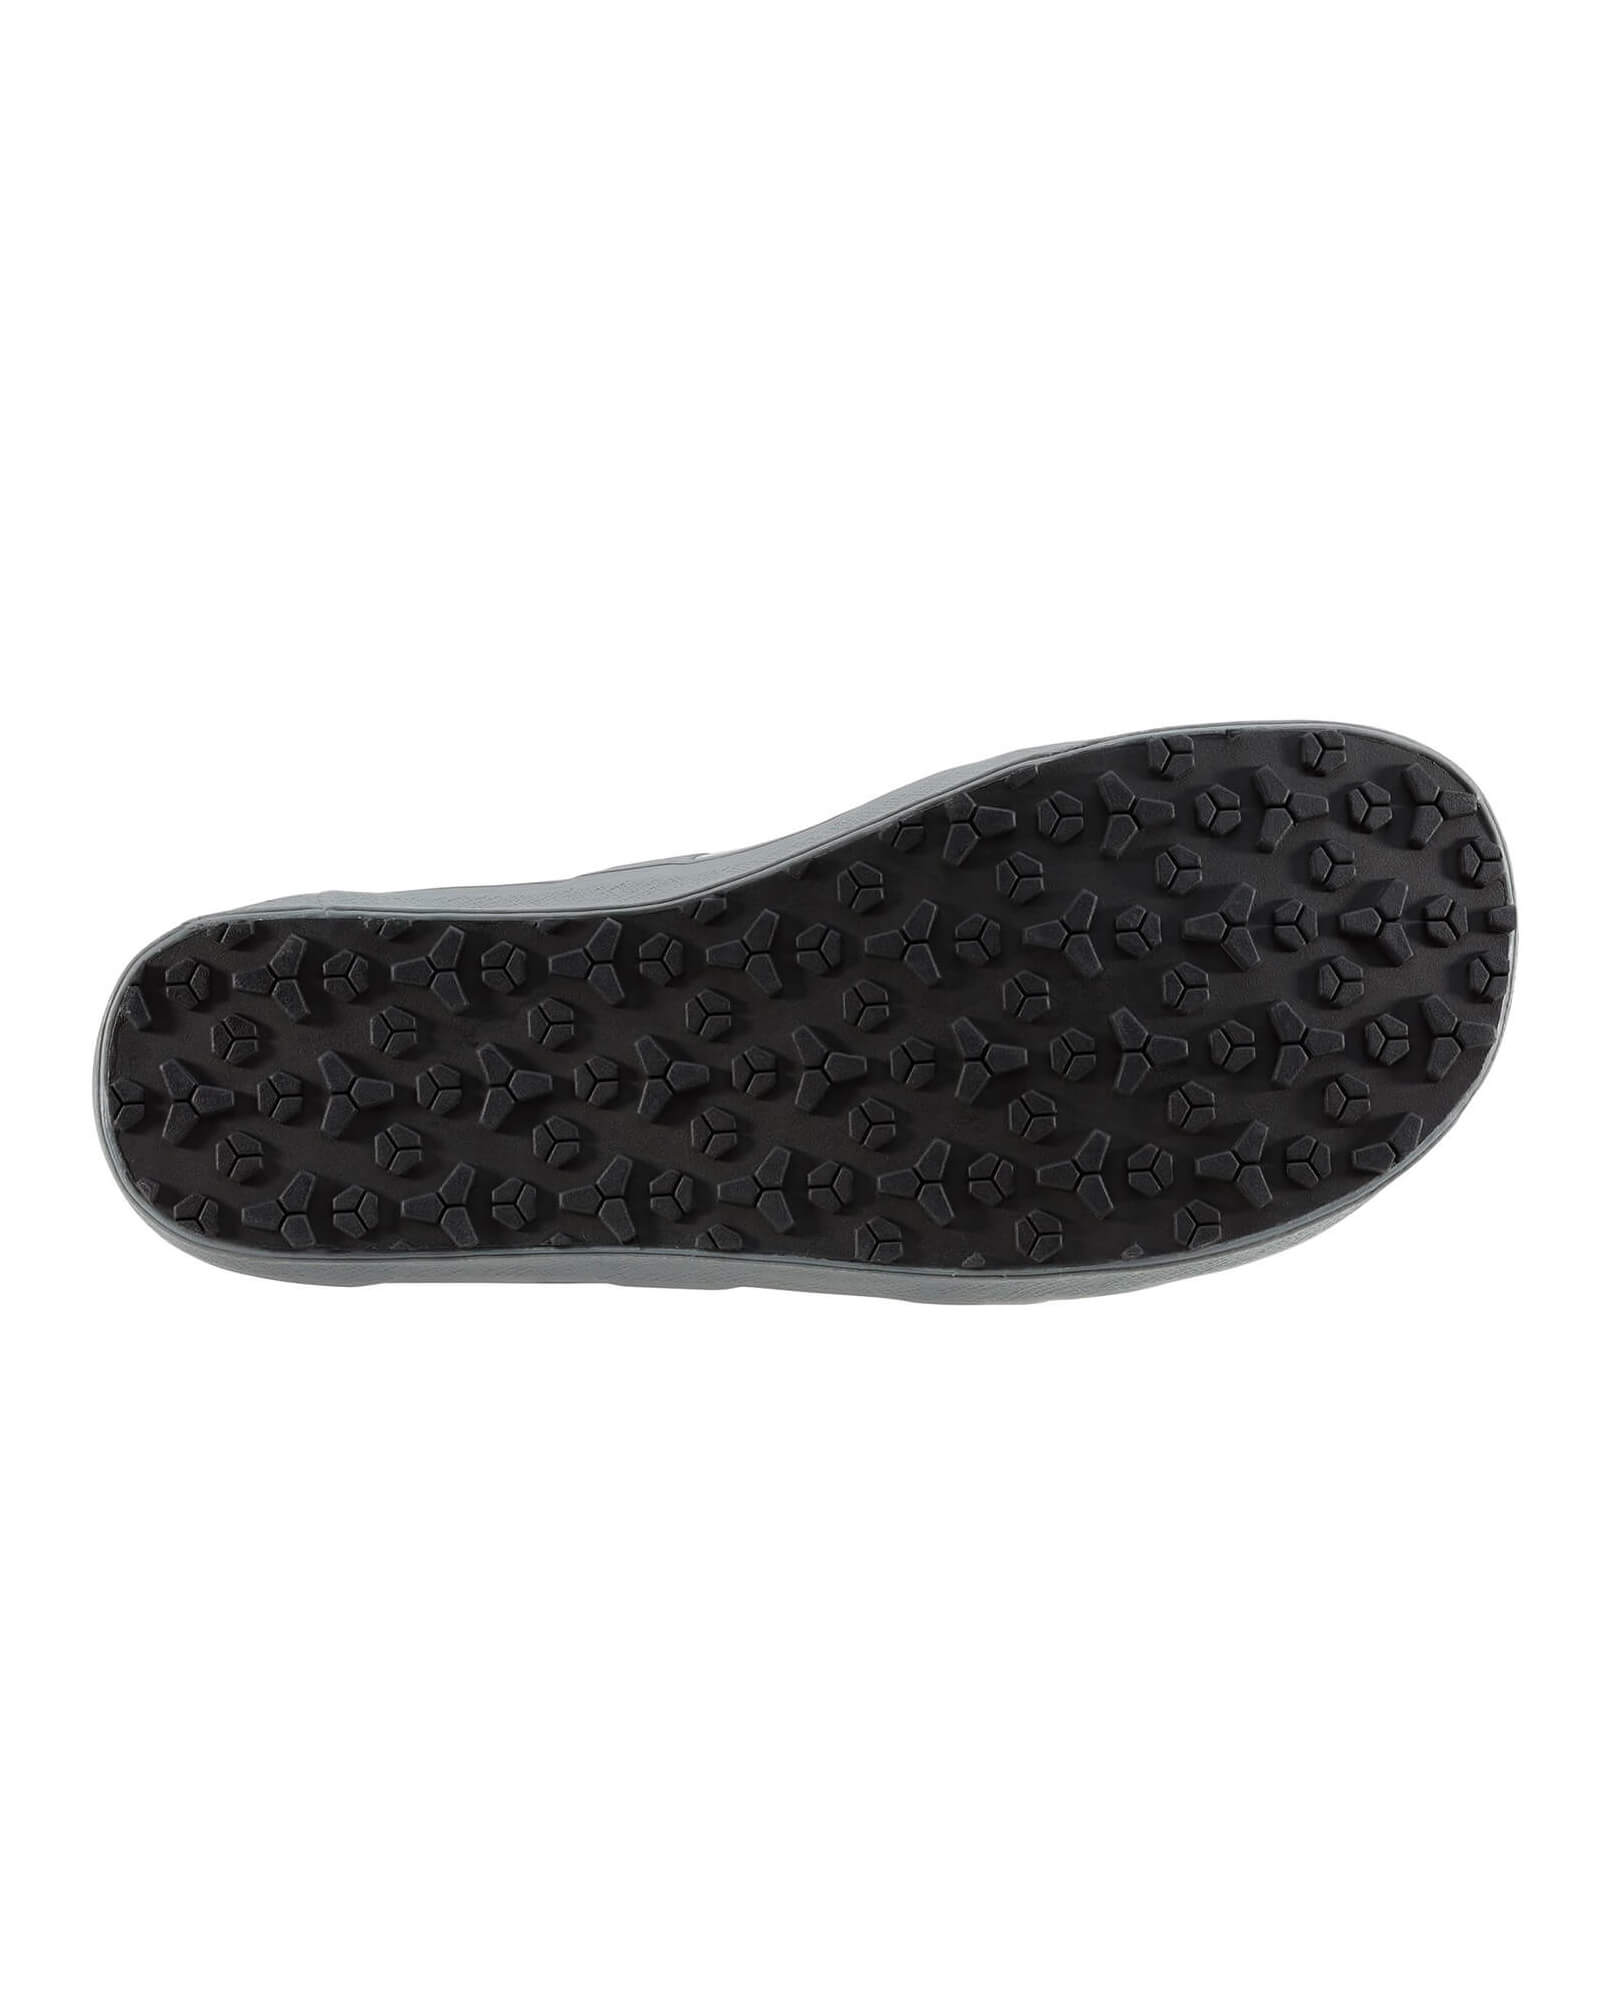 3mm NRS Backwater Wetshoes